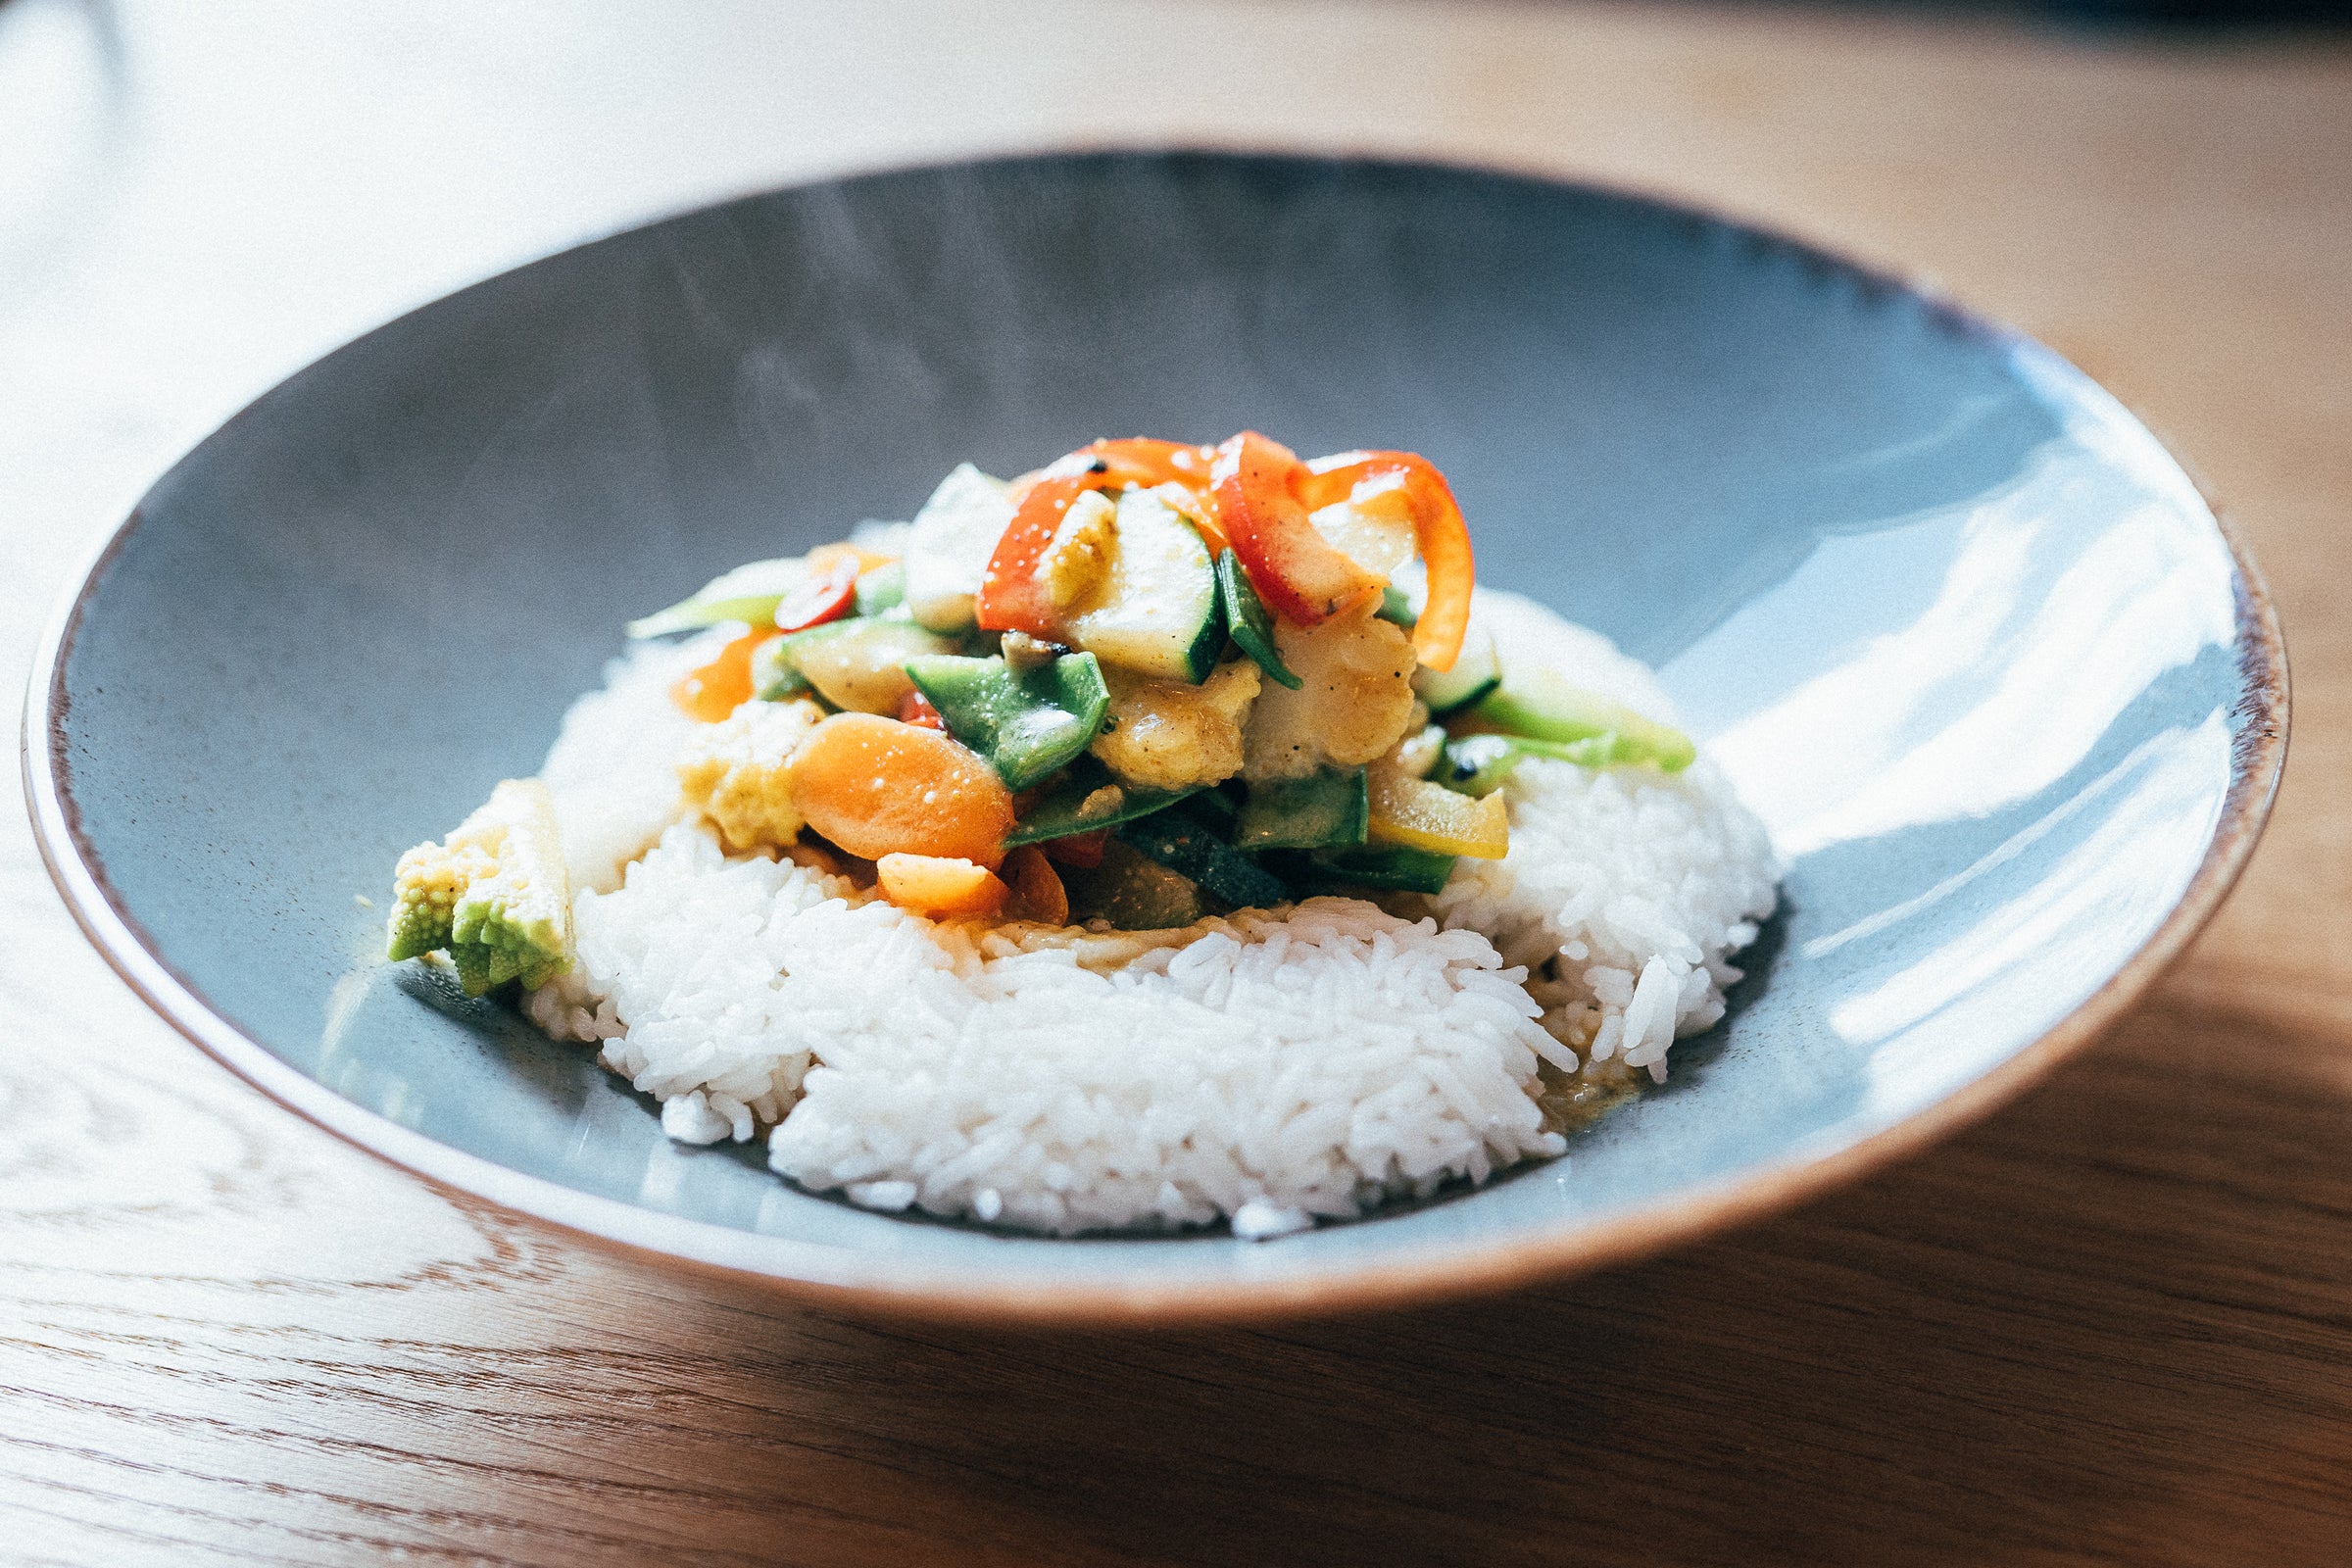 Delicious vegetables on rice served in a beautiful blue plate.